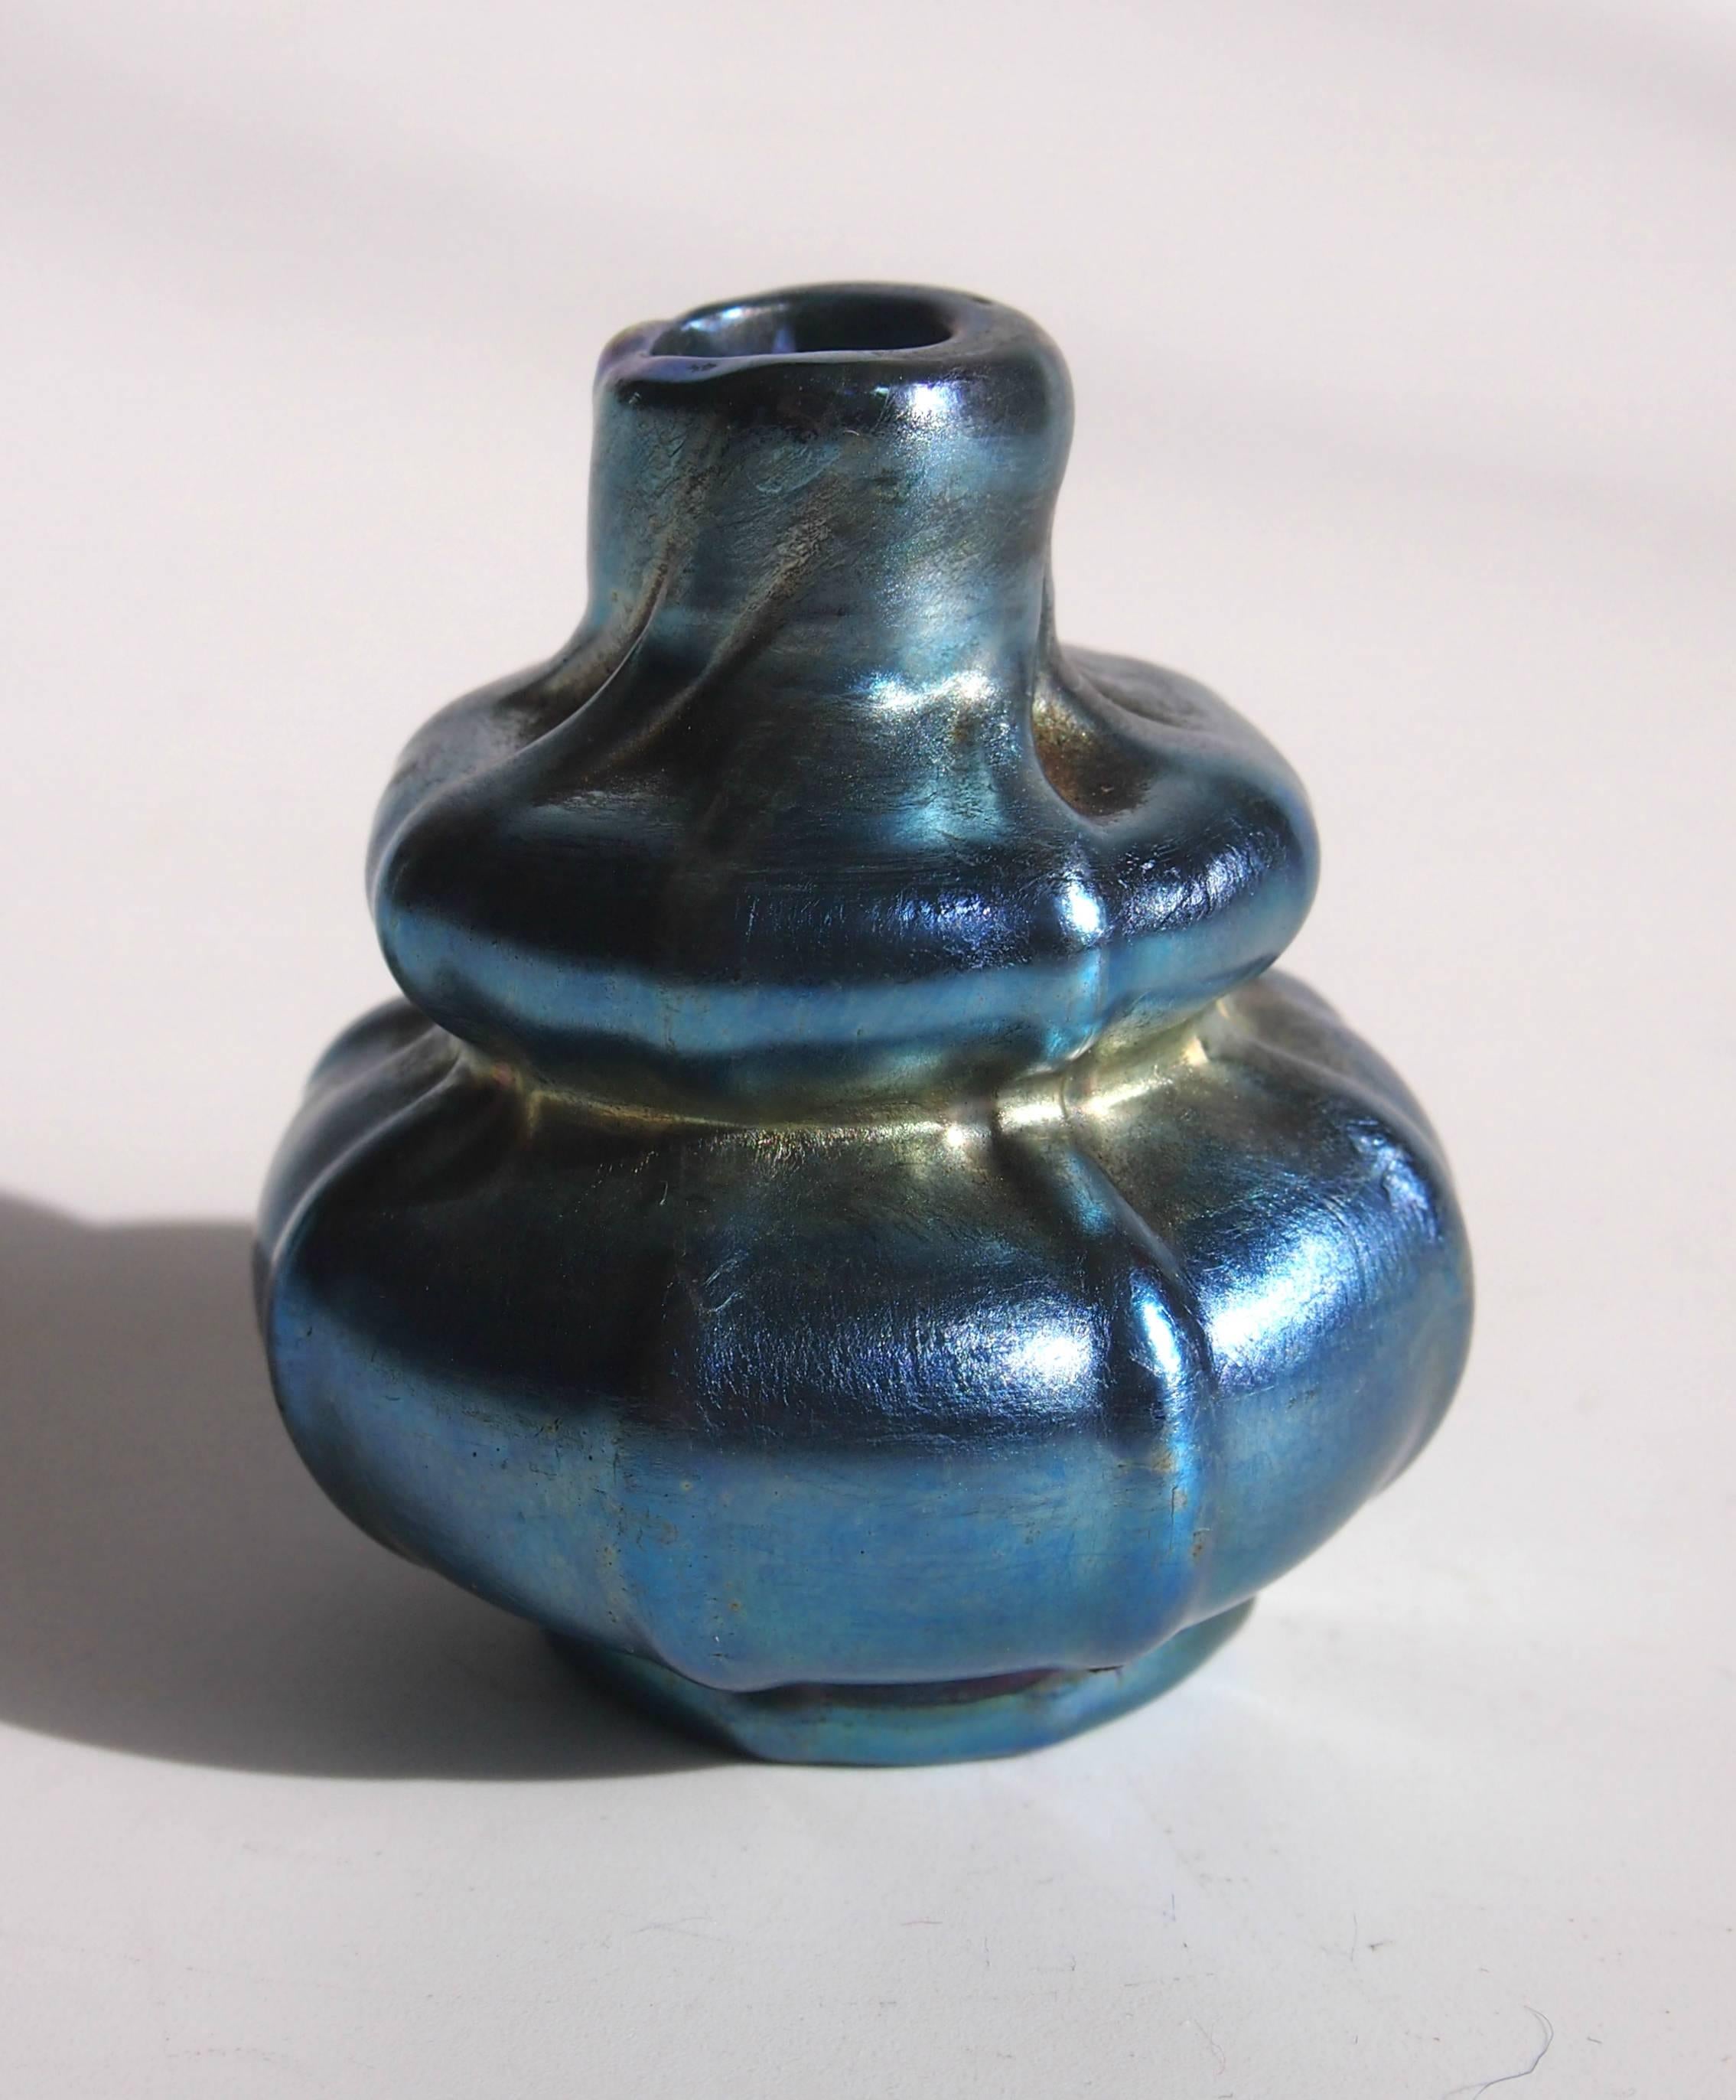 A very rare organic ribbed Louis Comfort Tiffany blue Favrile miniature vase in the Jugendstil style. Beautifully signed 'L.C.Tiffany Inc Favrile' Then (indistinctly) '7168 U' and a very indistinct shape code '10/??' (See picture 6) dating circa